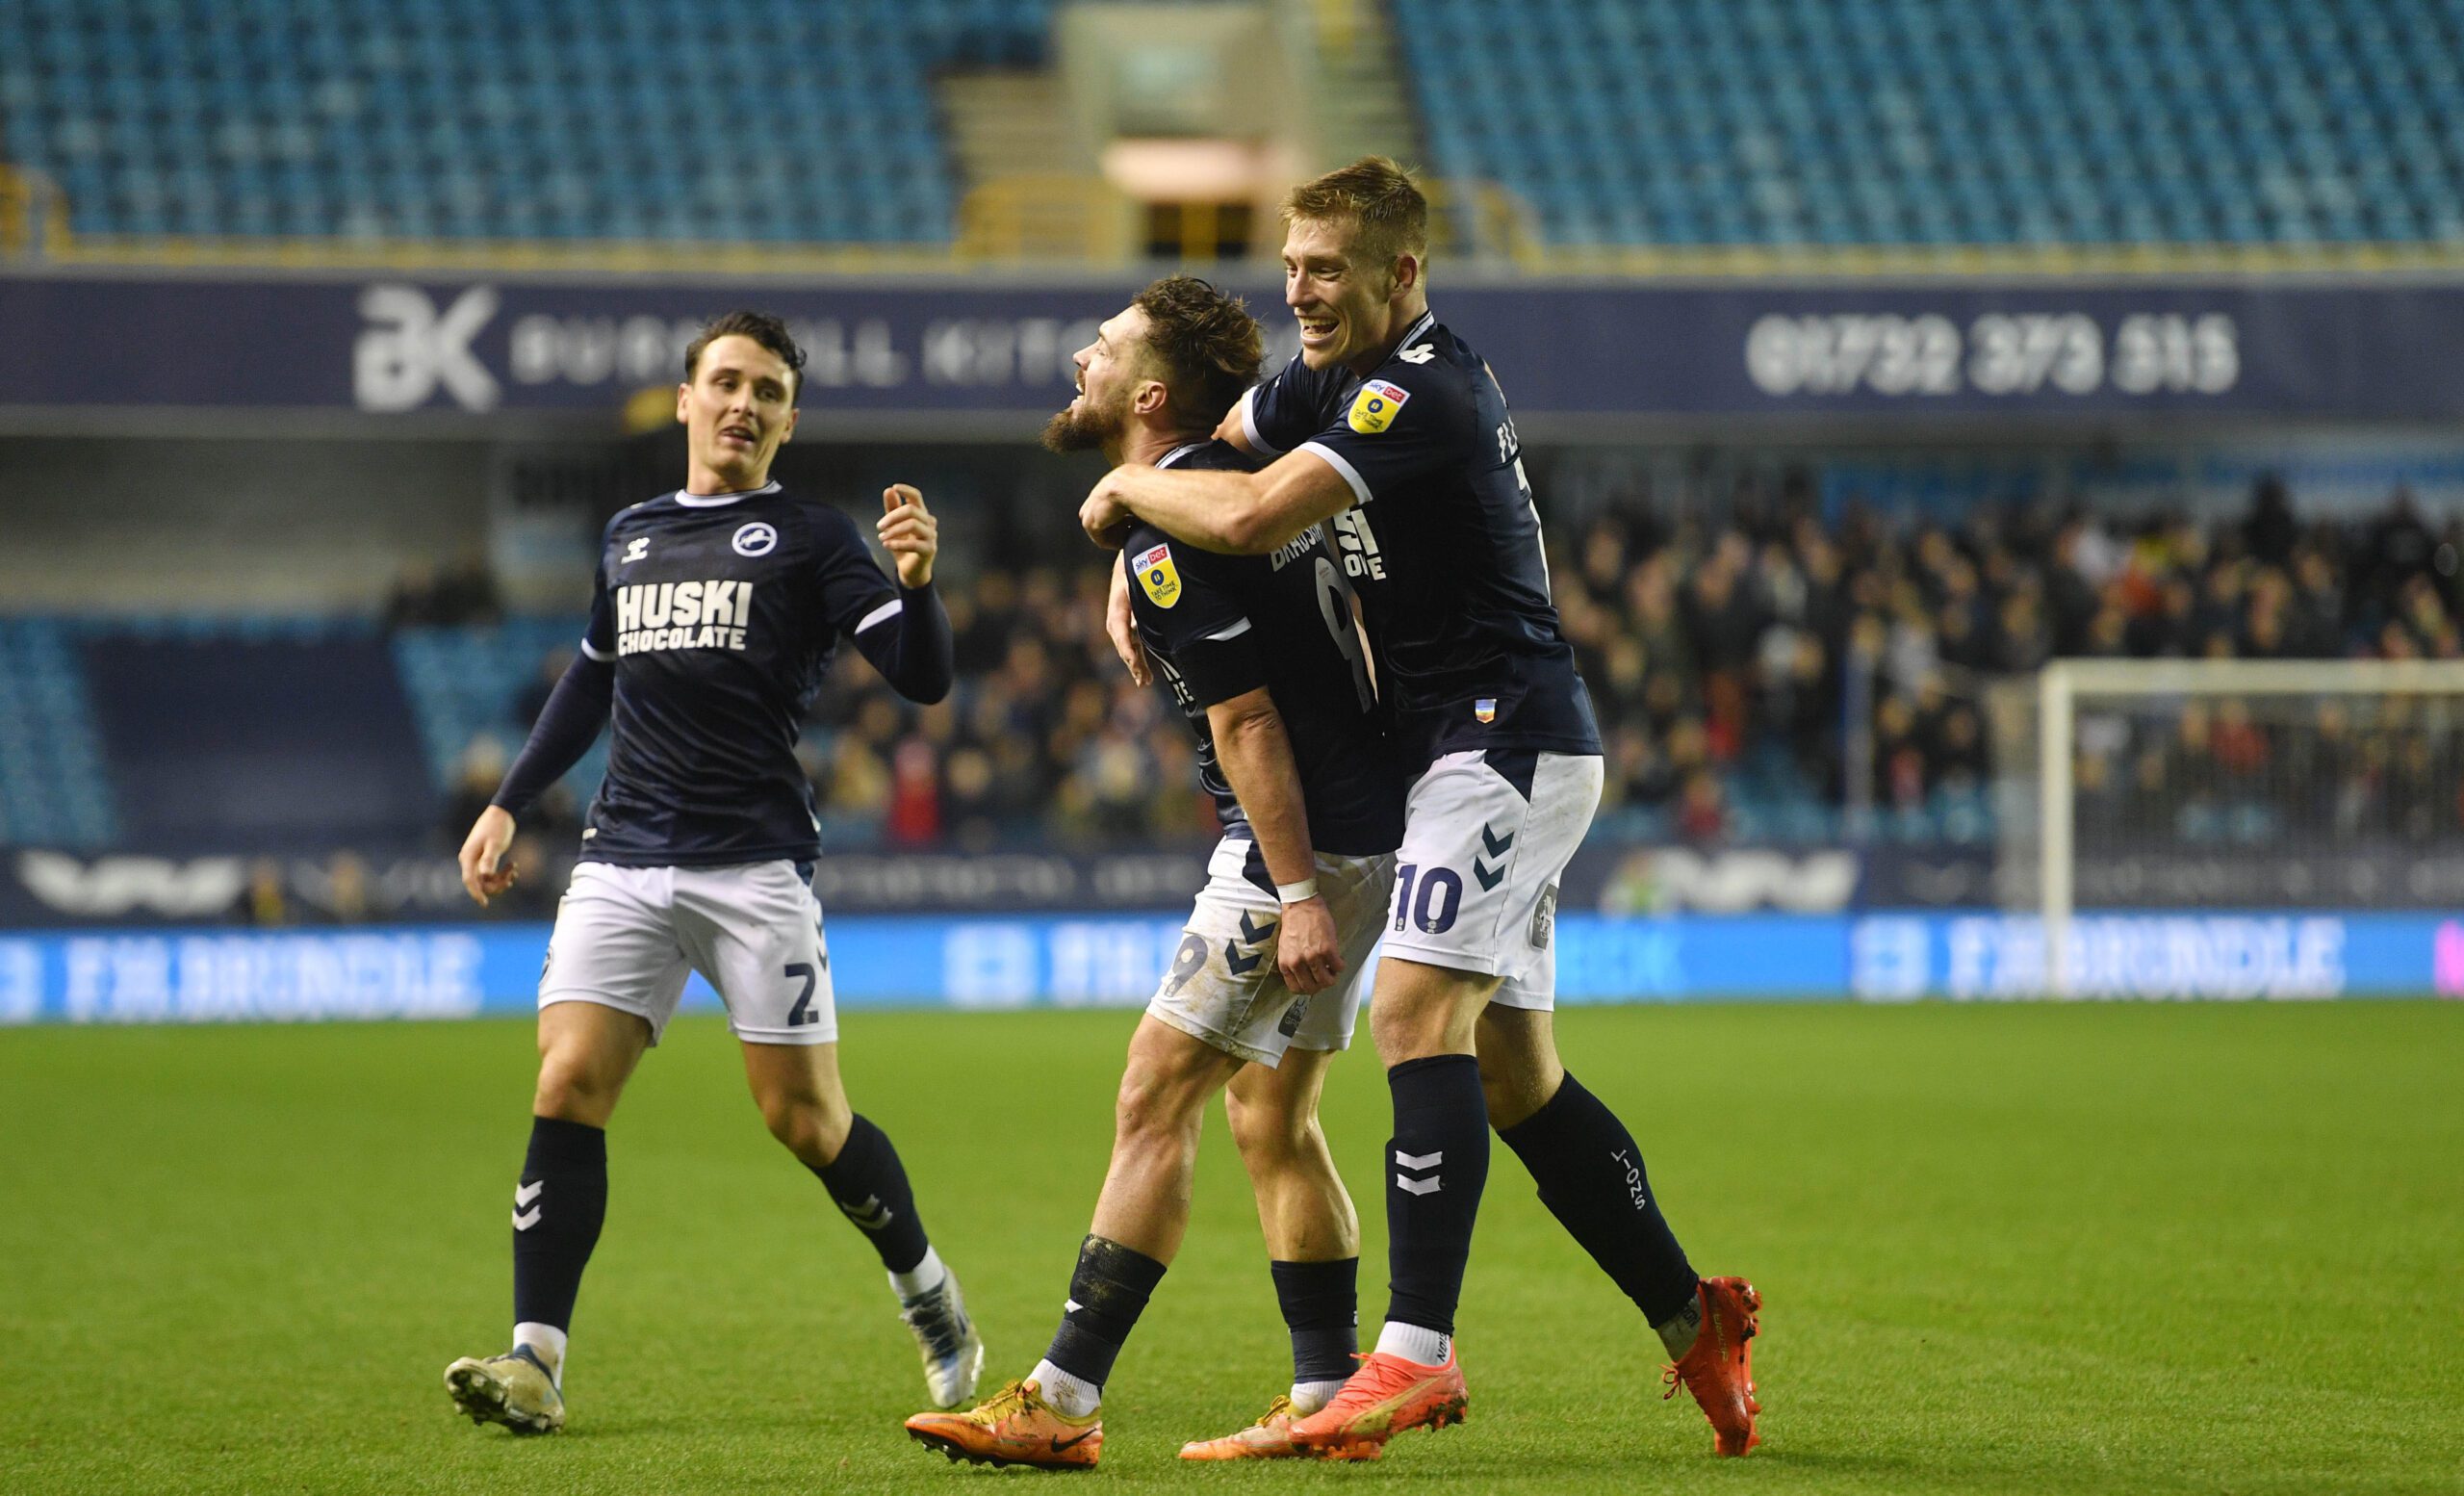 Millwall 3-0 Rotherham: Lions cruise to victory at The Den